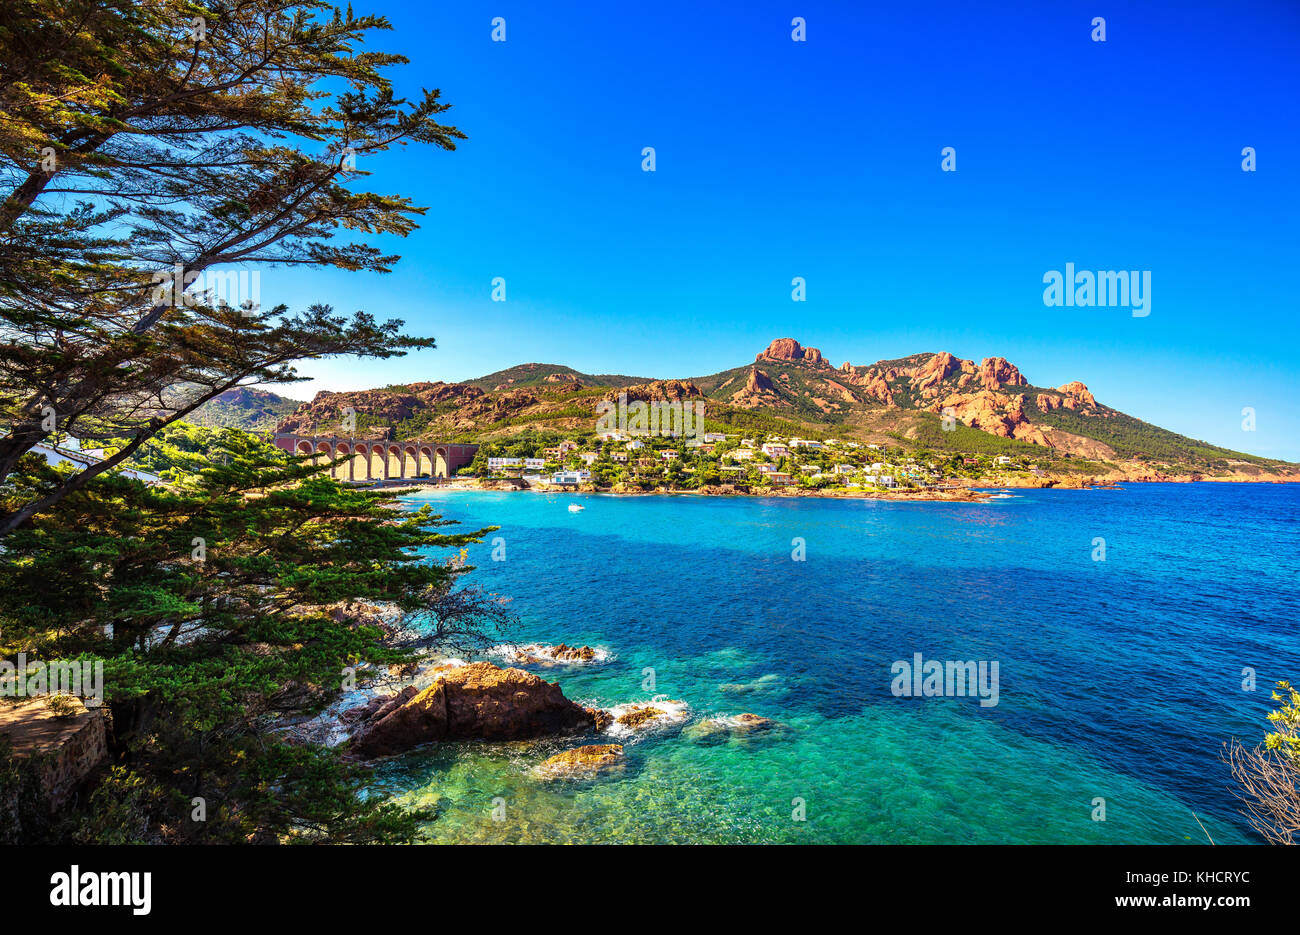 Esterel mediterranean red rocks coast, beach, tree and sea. French Riviera in Cote d Azur near Cannes Saint Raphael, Provence, France, Europe. Stock Photo